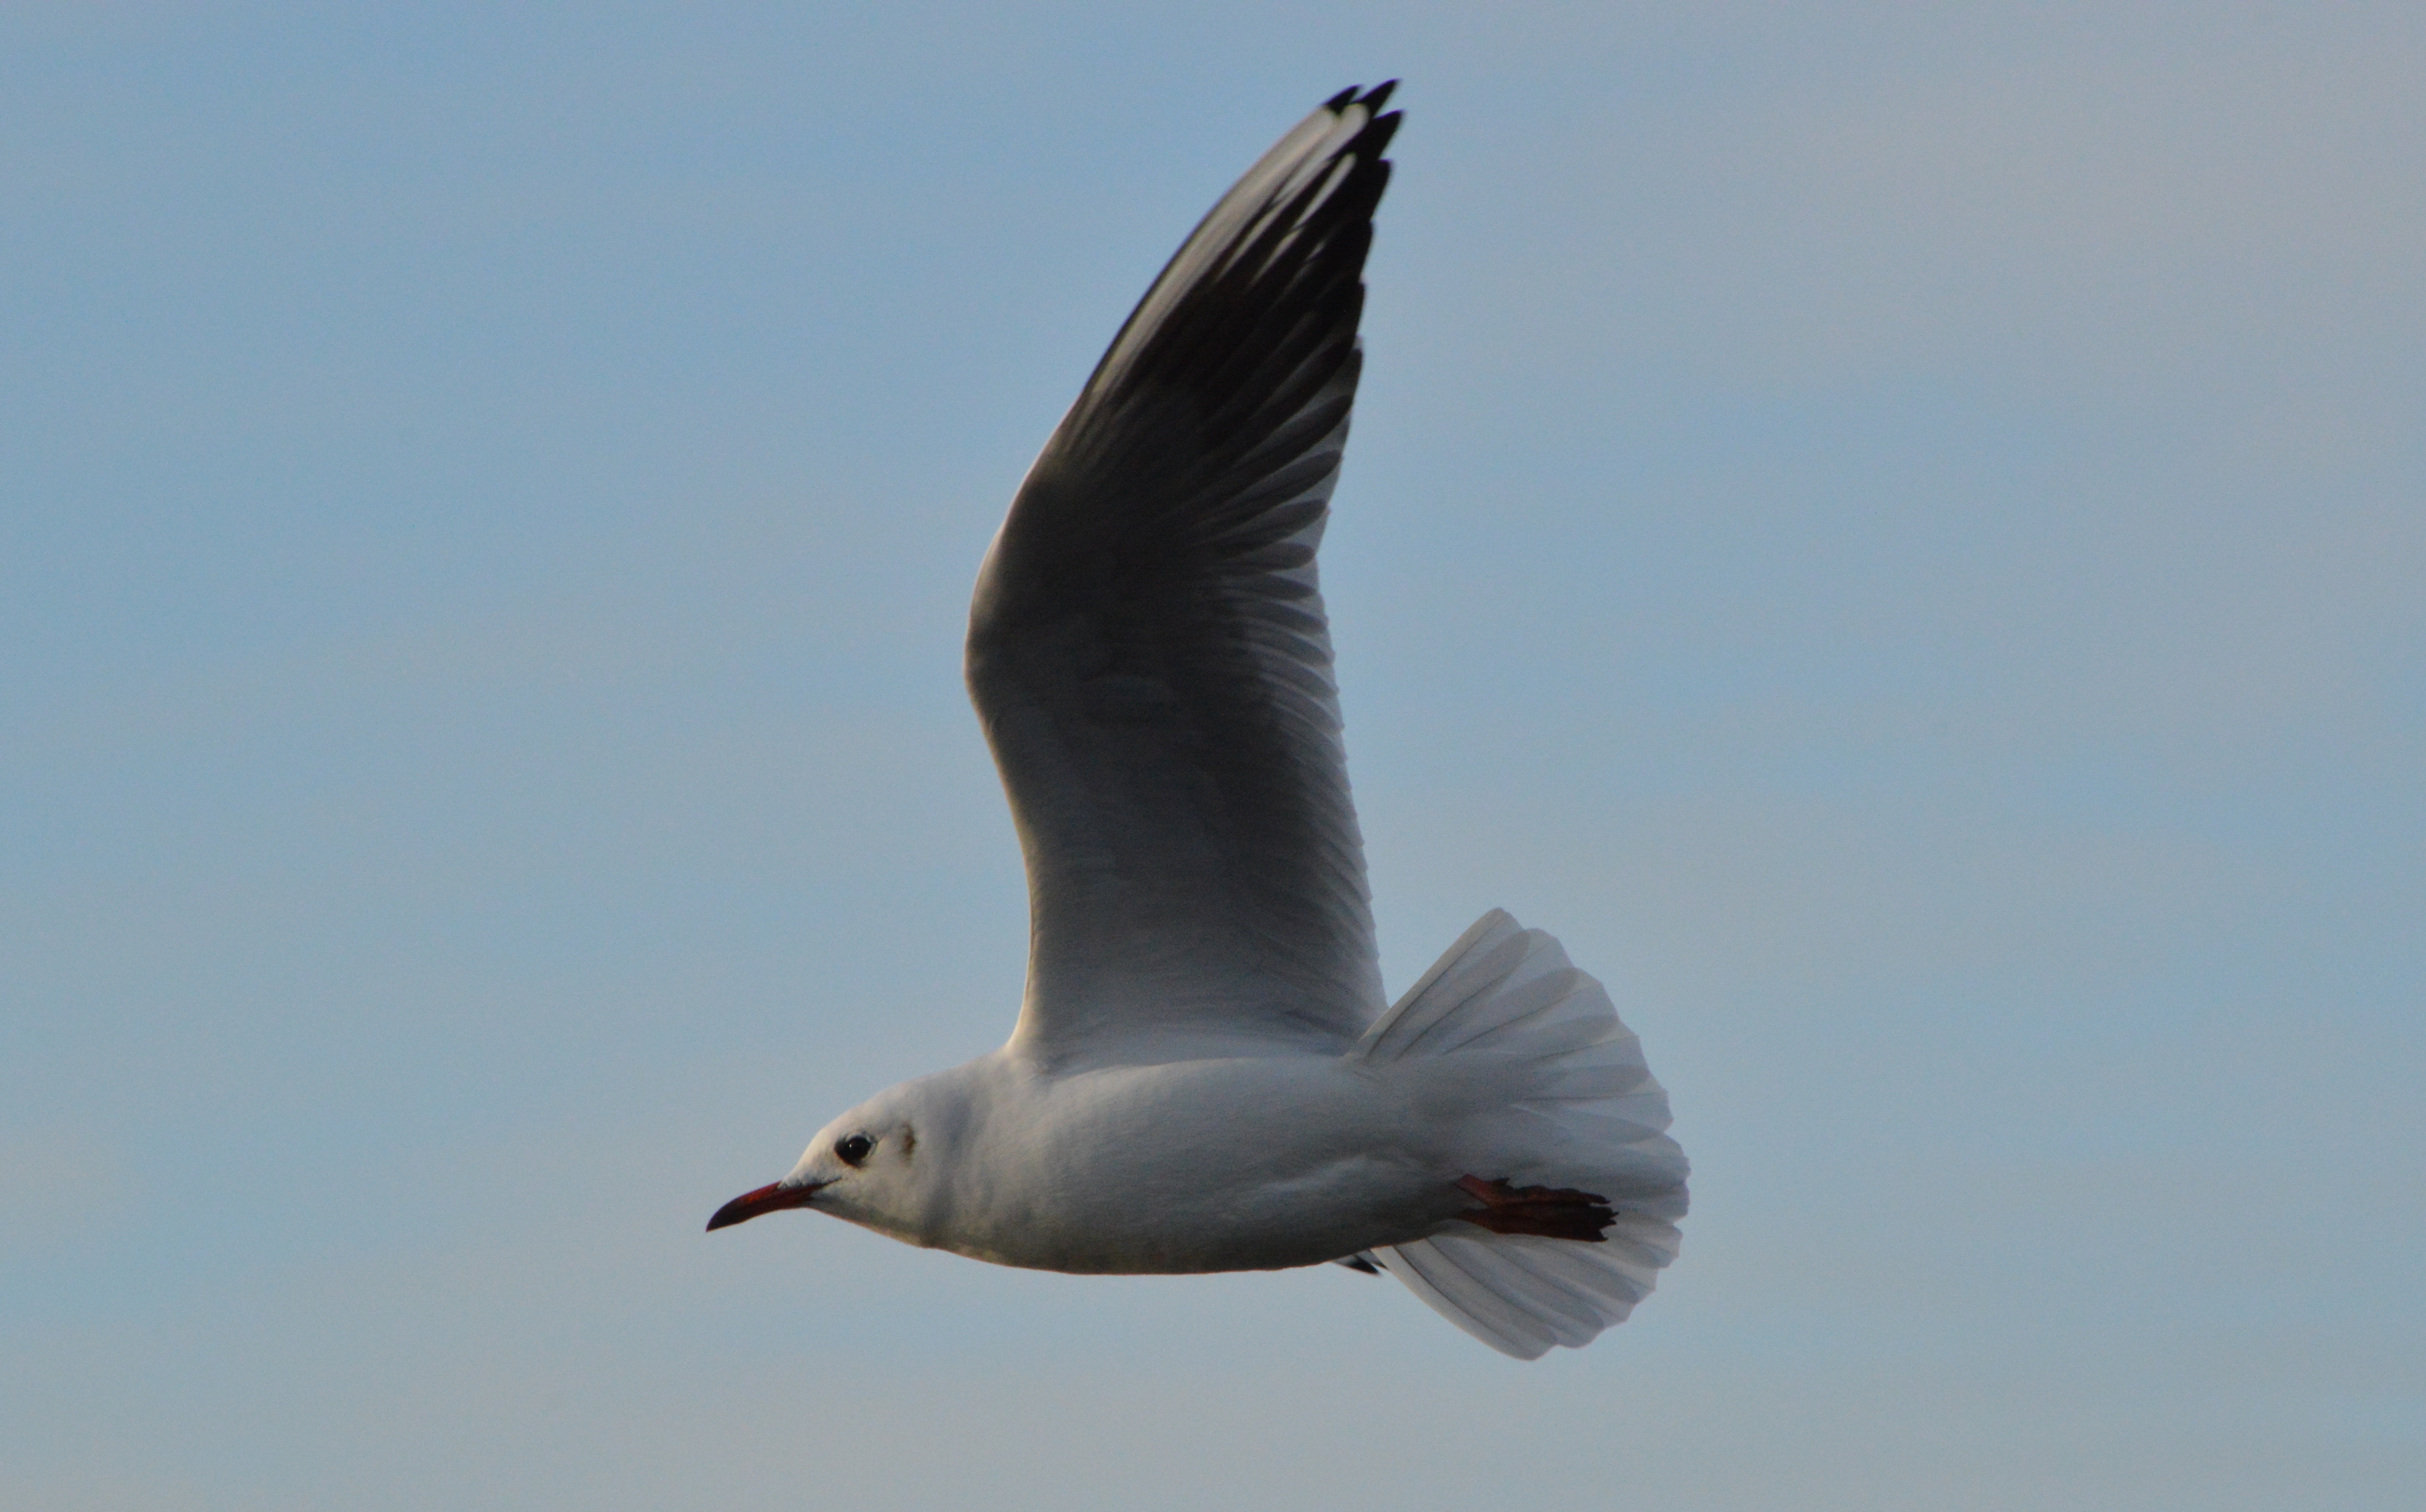 Seagull Flying in the Air, Air, Animal, Bird, Fly, HQ Photo